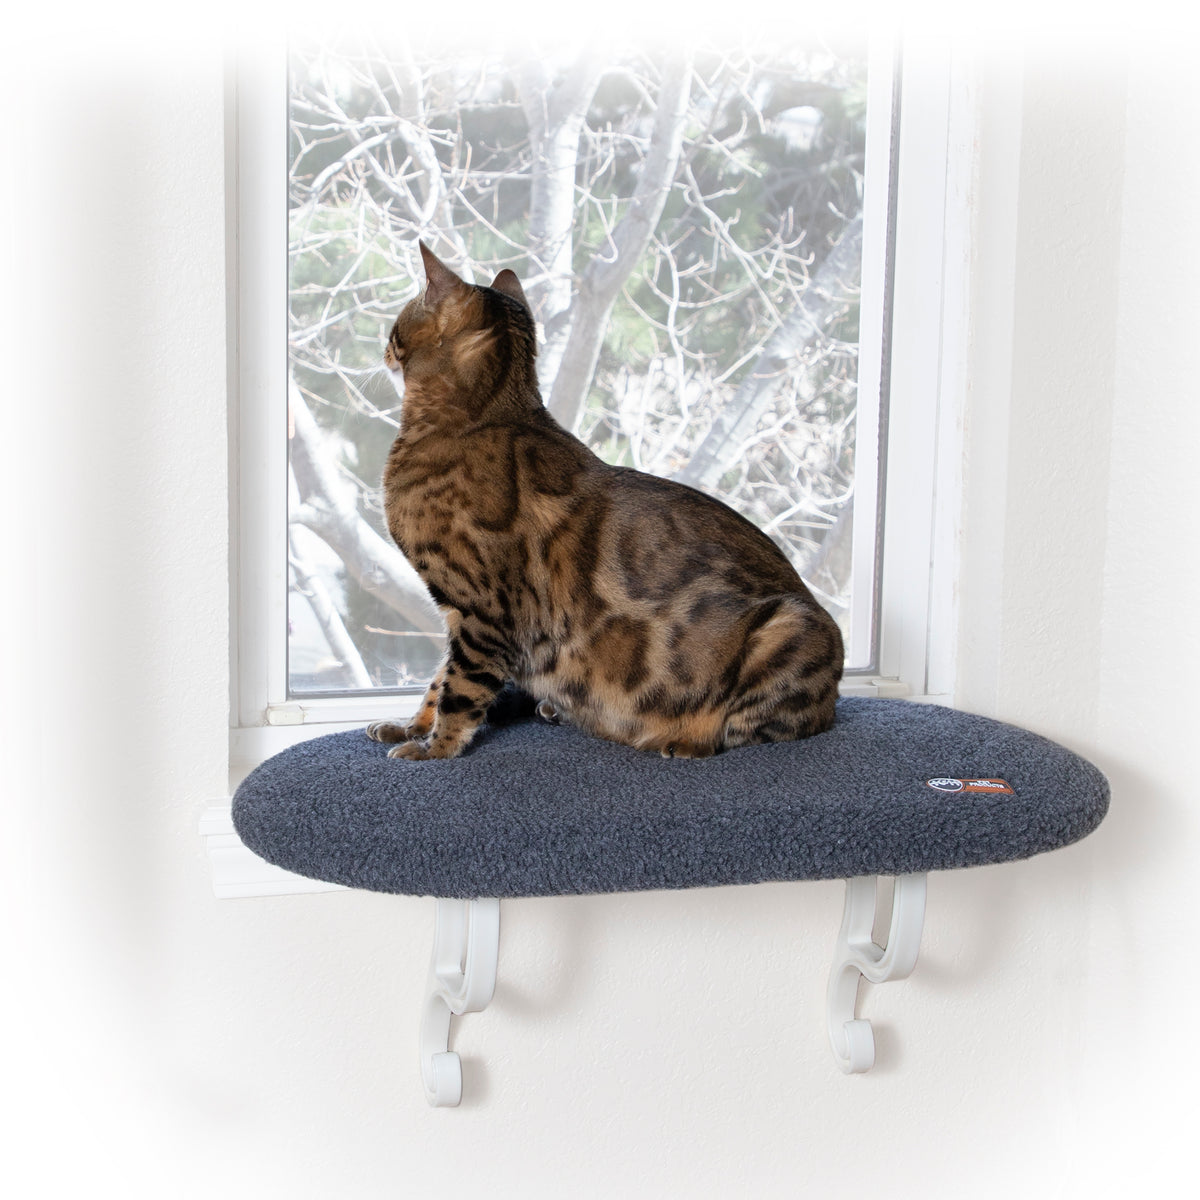 K&H Kitty Sill™ Window Perch Cat Bed - K&H Pet — K&H Pet Products